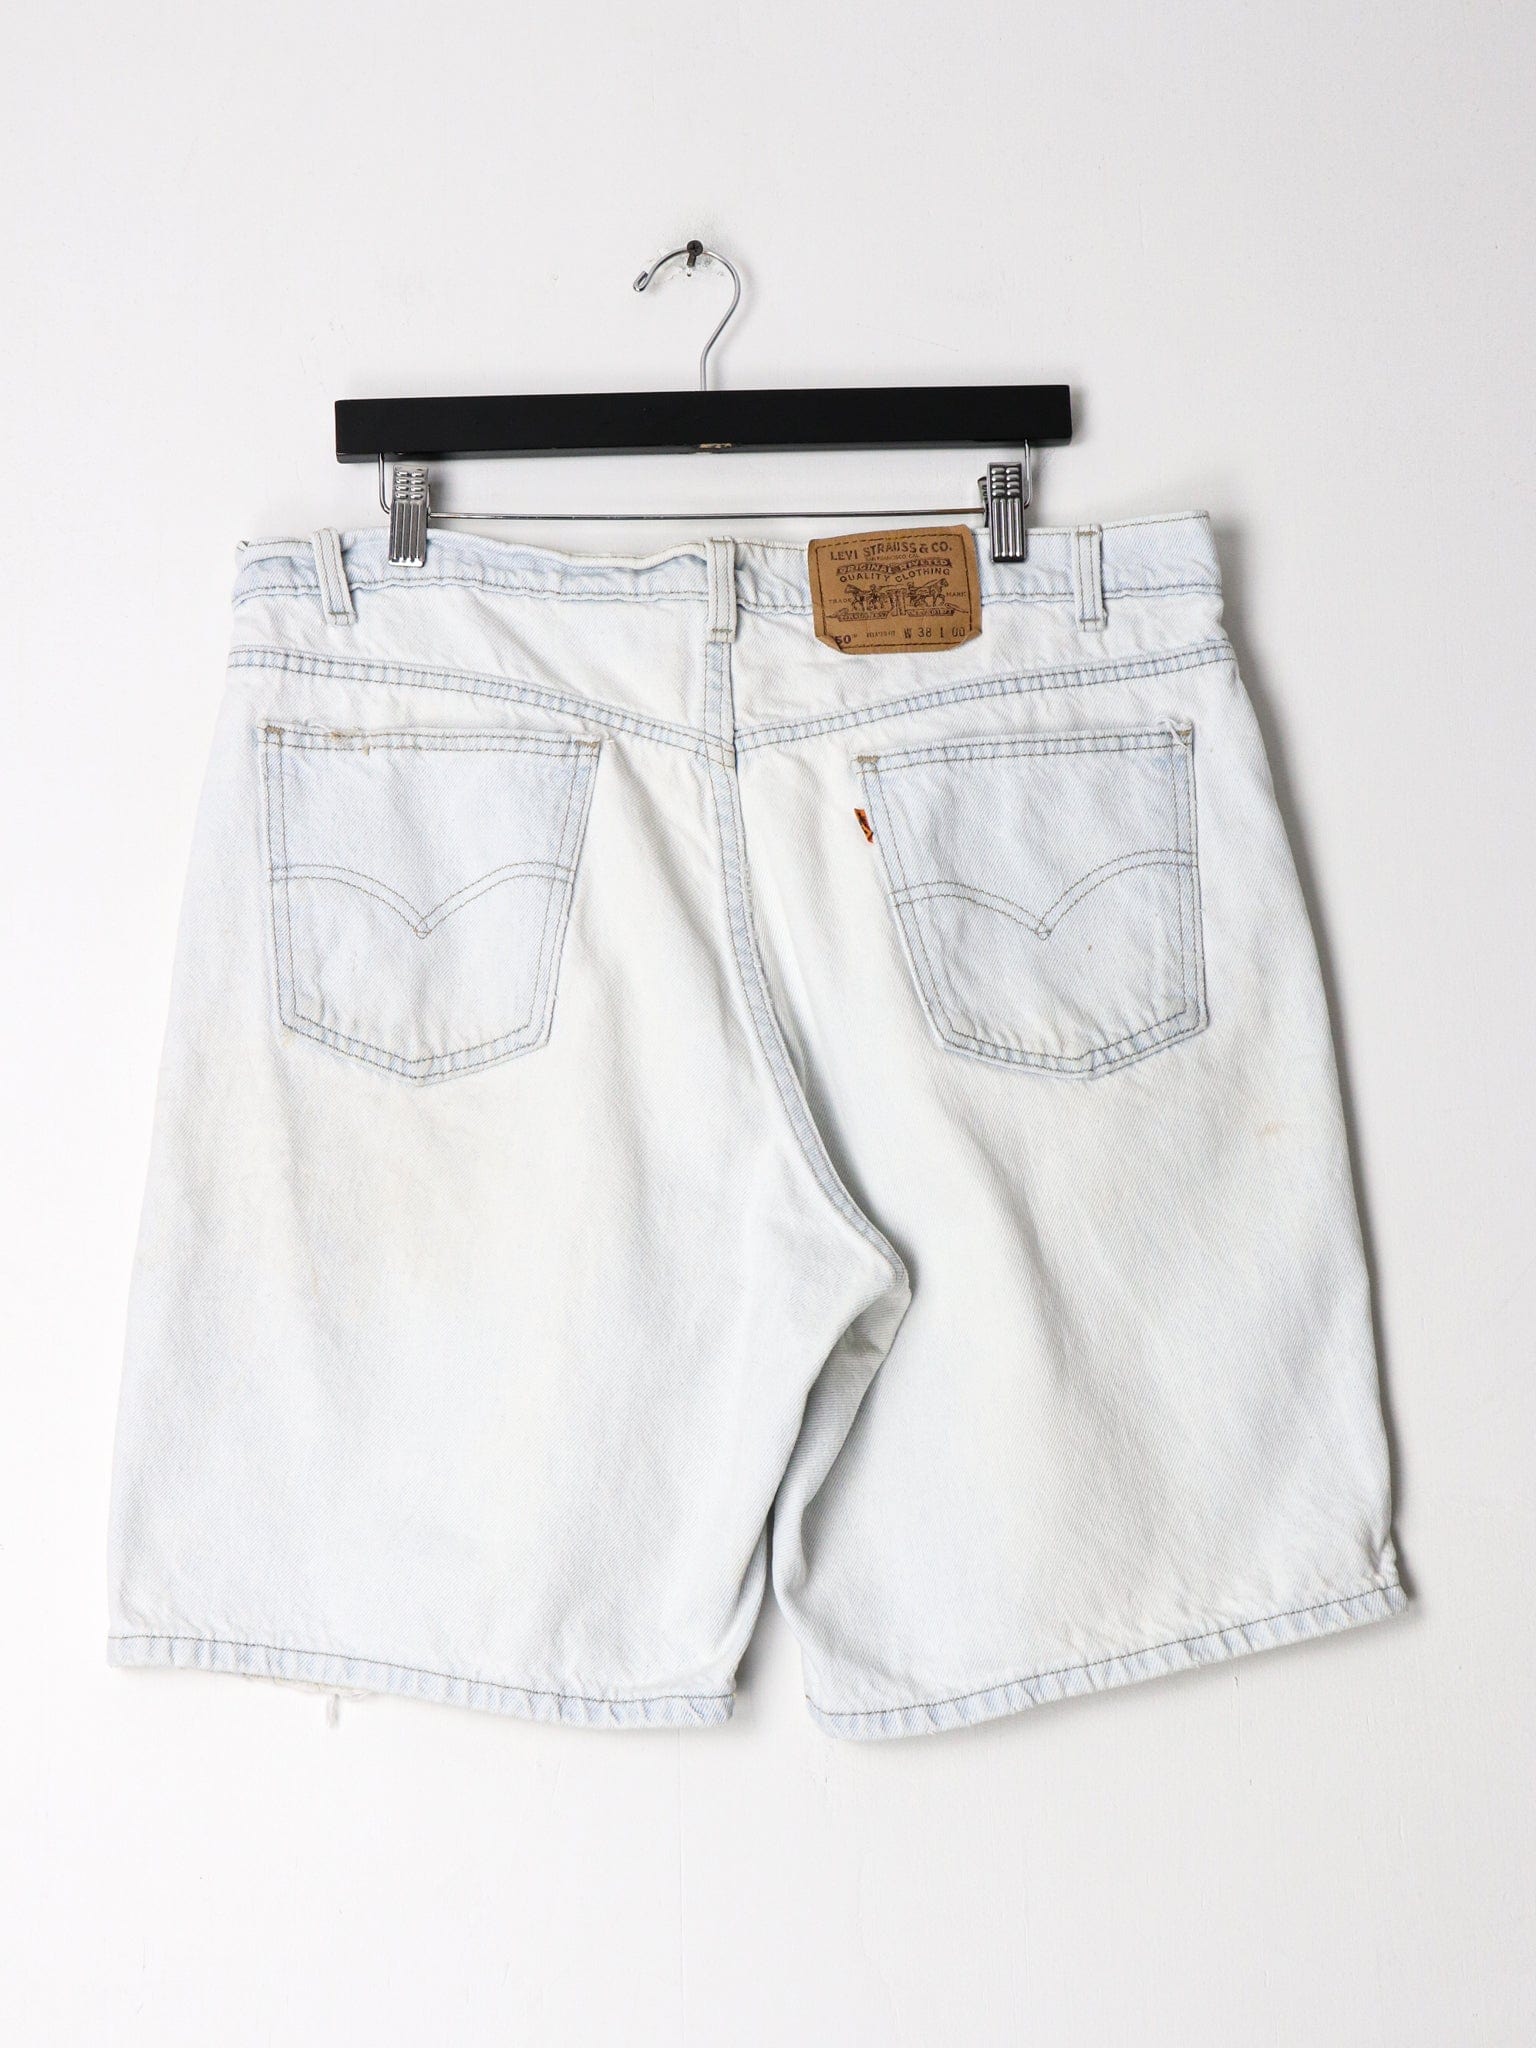 Vintage Levi's 550 Relaxed Fit Denim Shorts Size 38